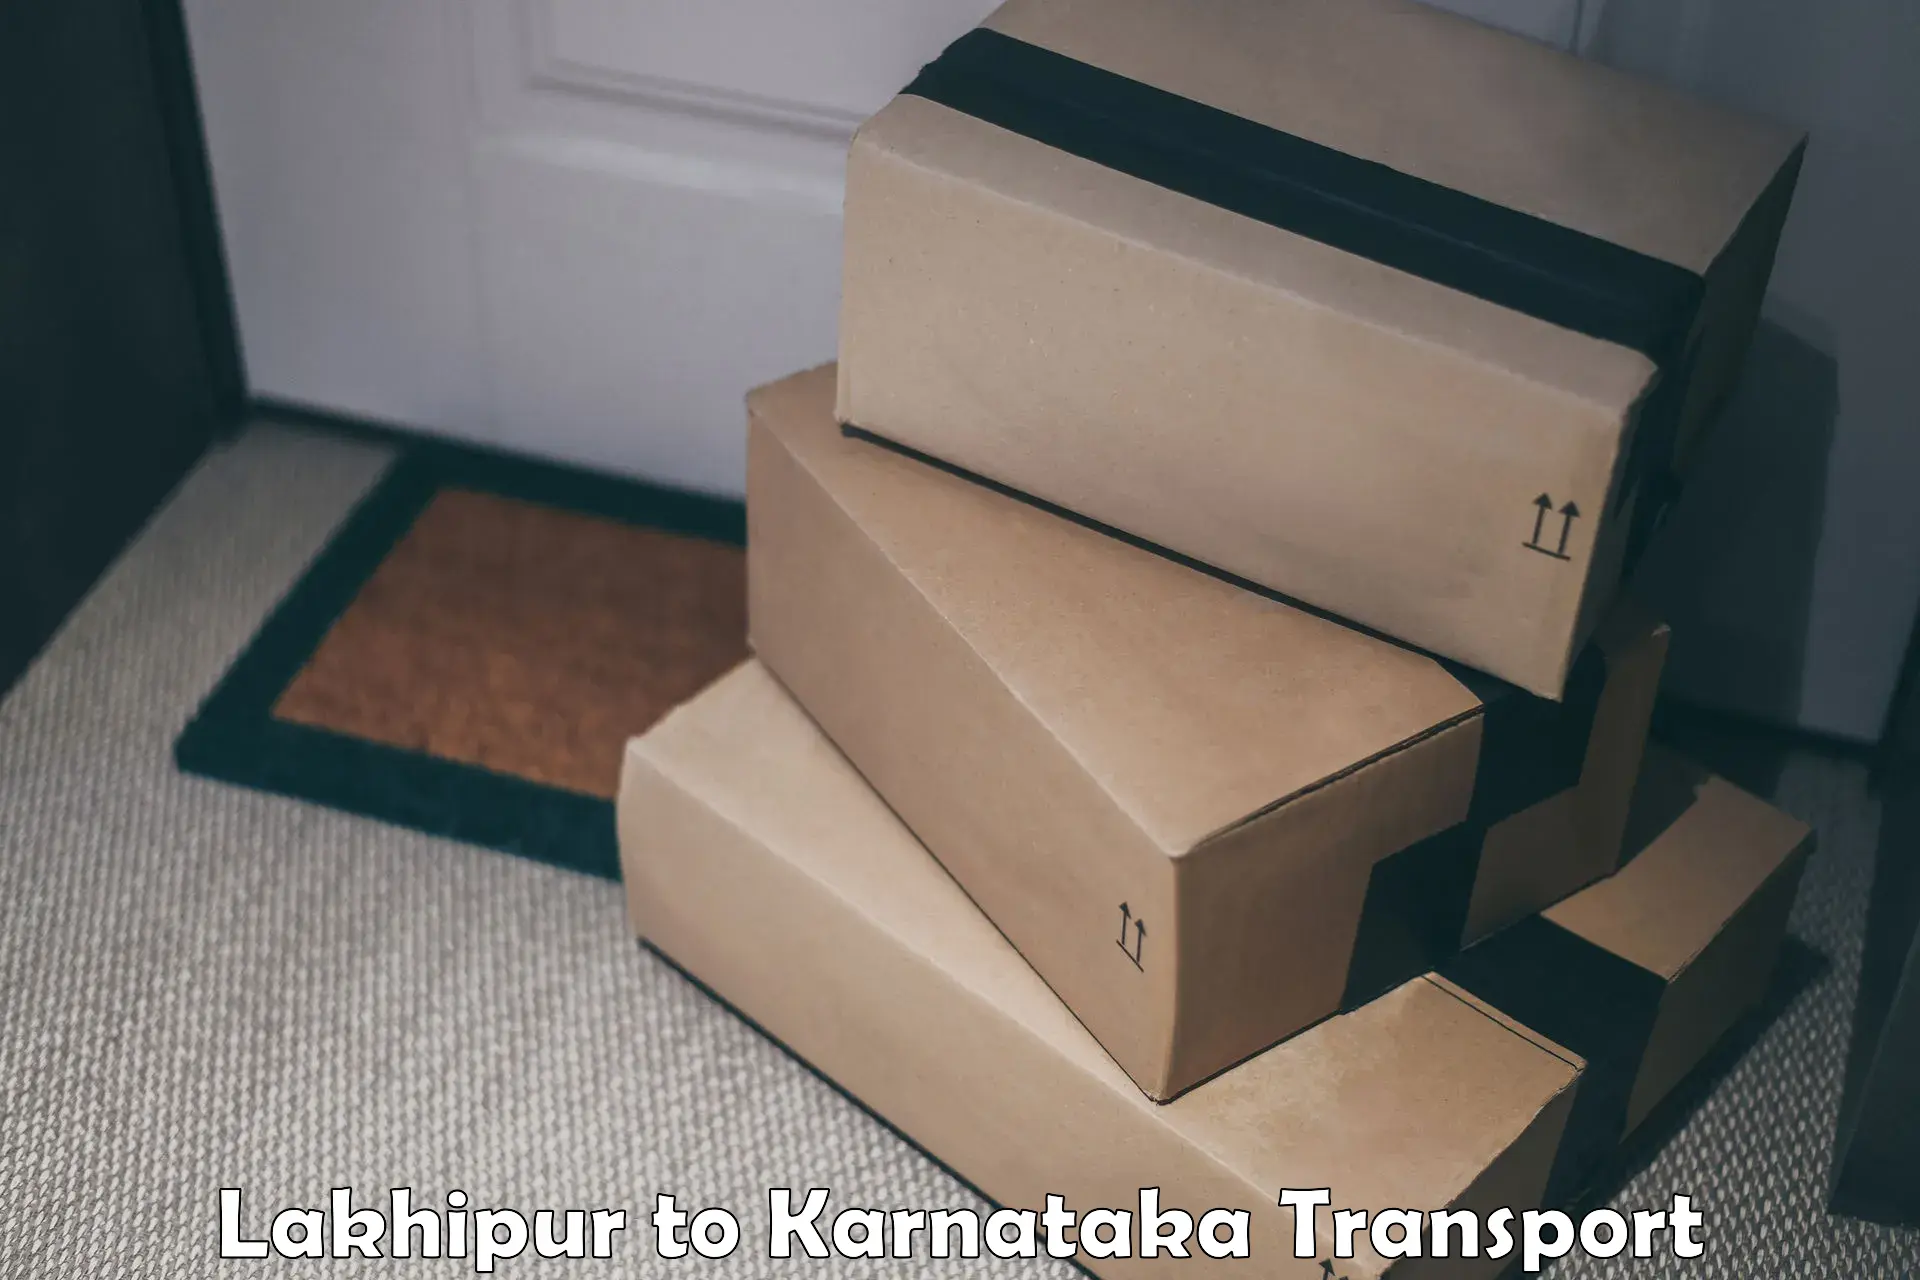 Delivery service Lakhipur to Mangalore Port